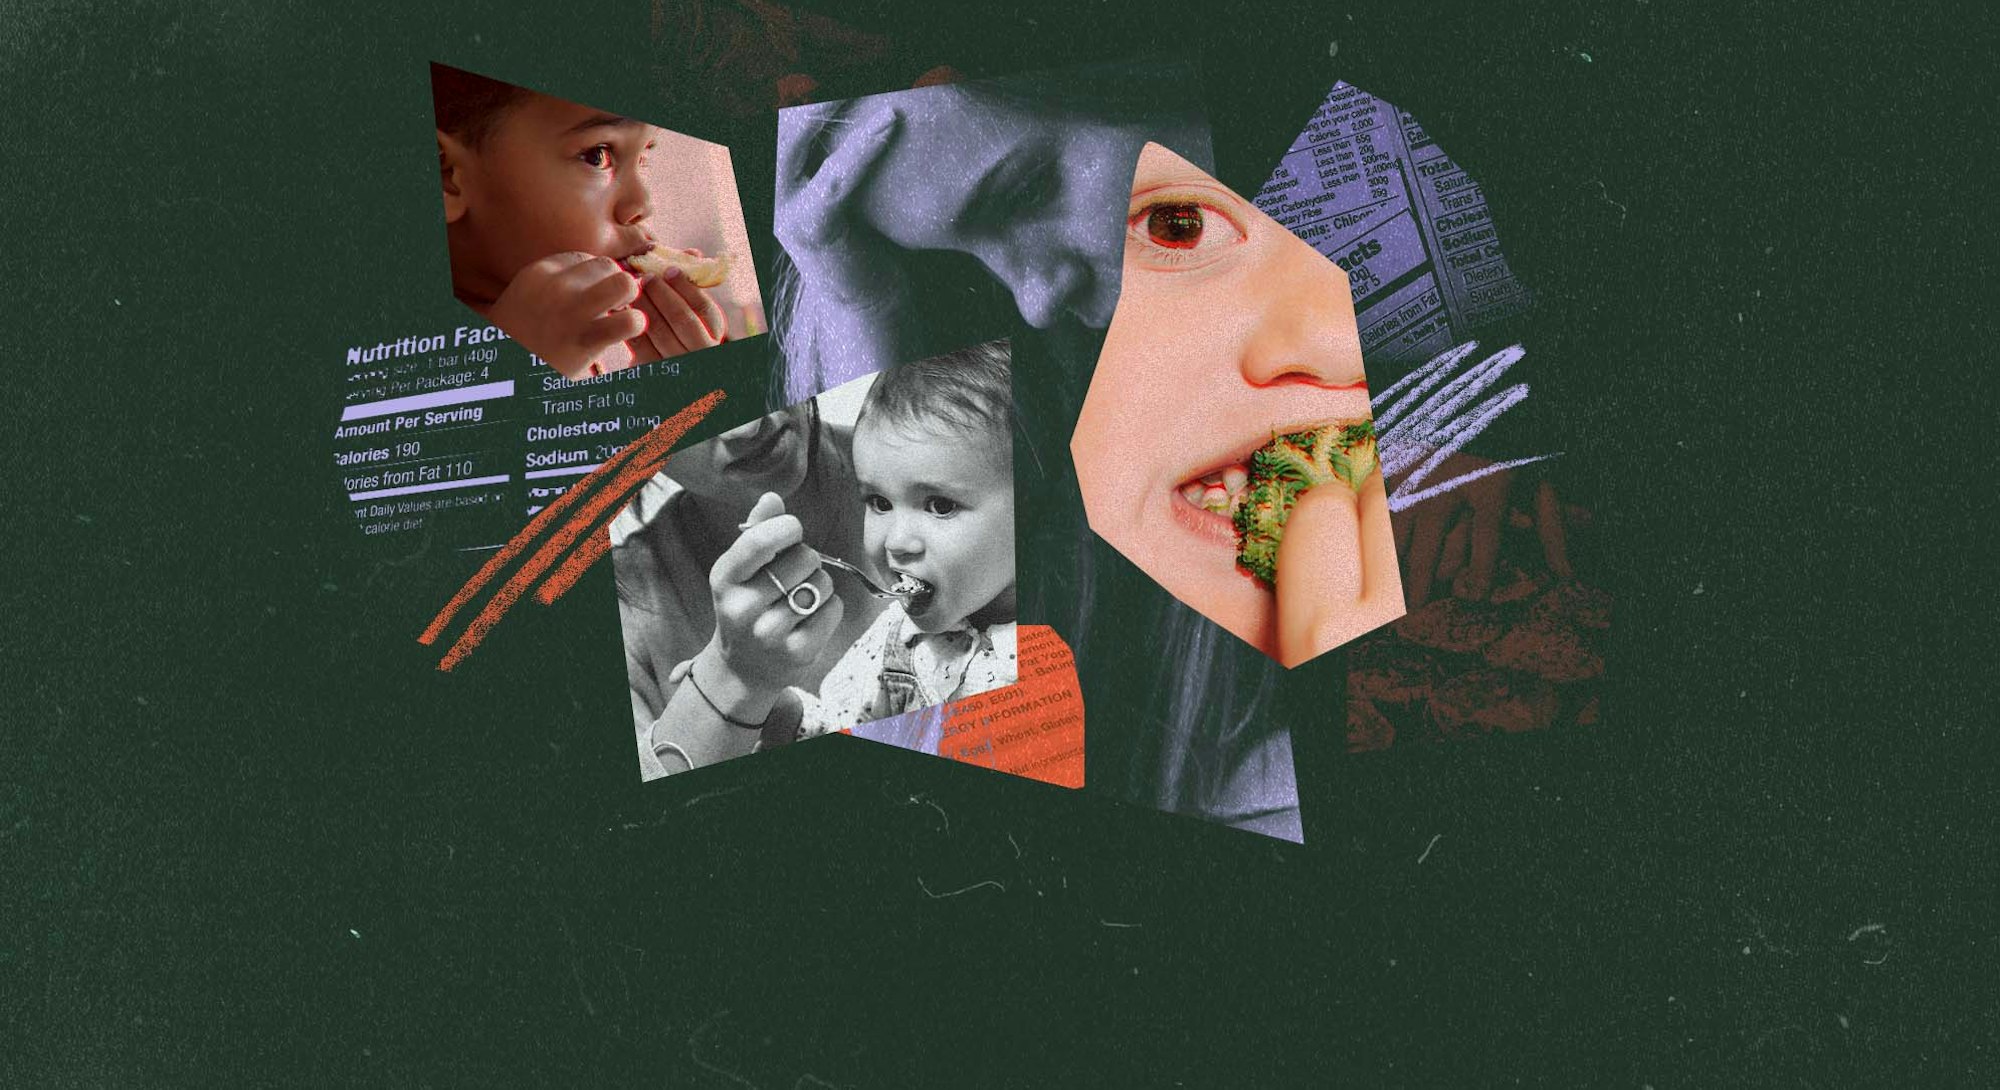 Collage of images of very young children eating food.